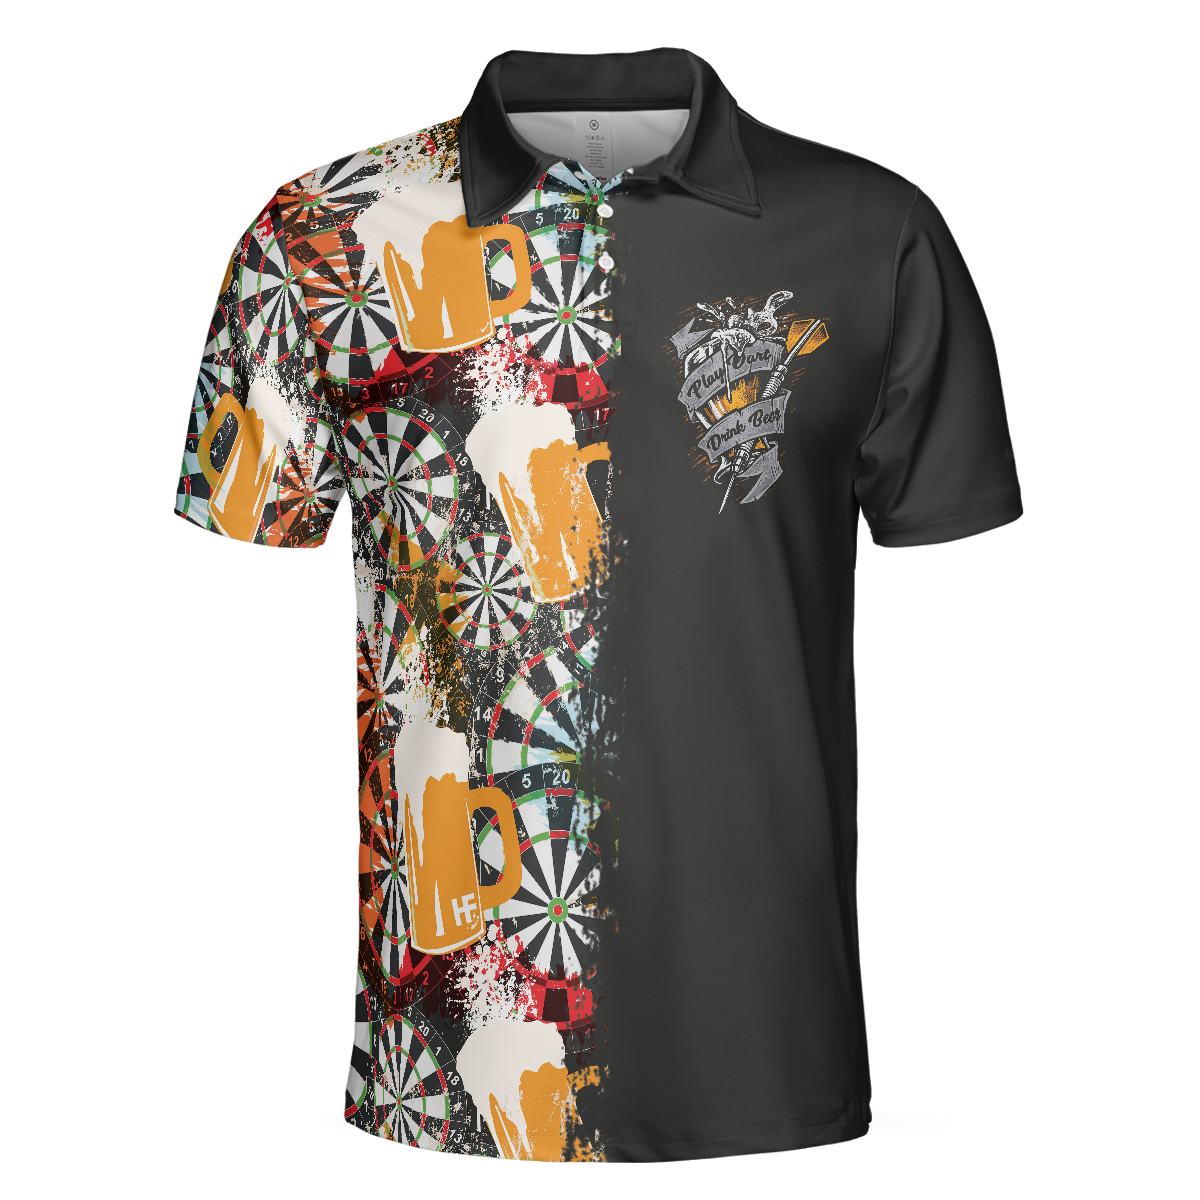 Play Darts And Drink Beer Polo Shirt/ Colorful Dart Board Polo Shirt/ Dart Shirt For Beer Lovers